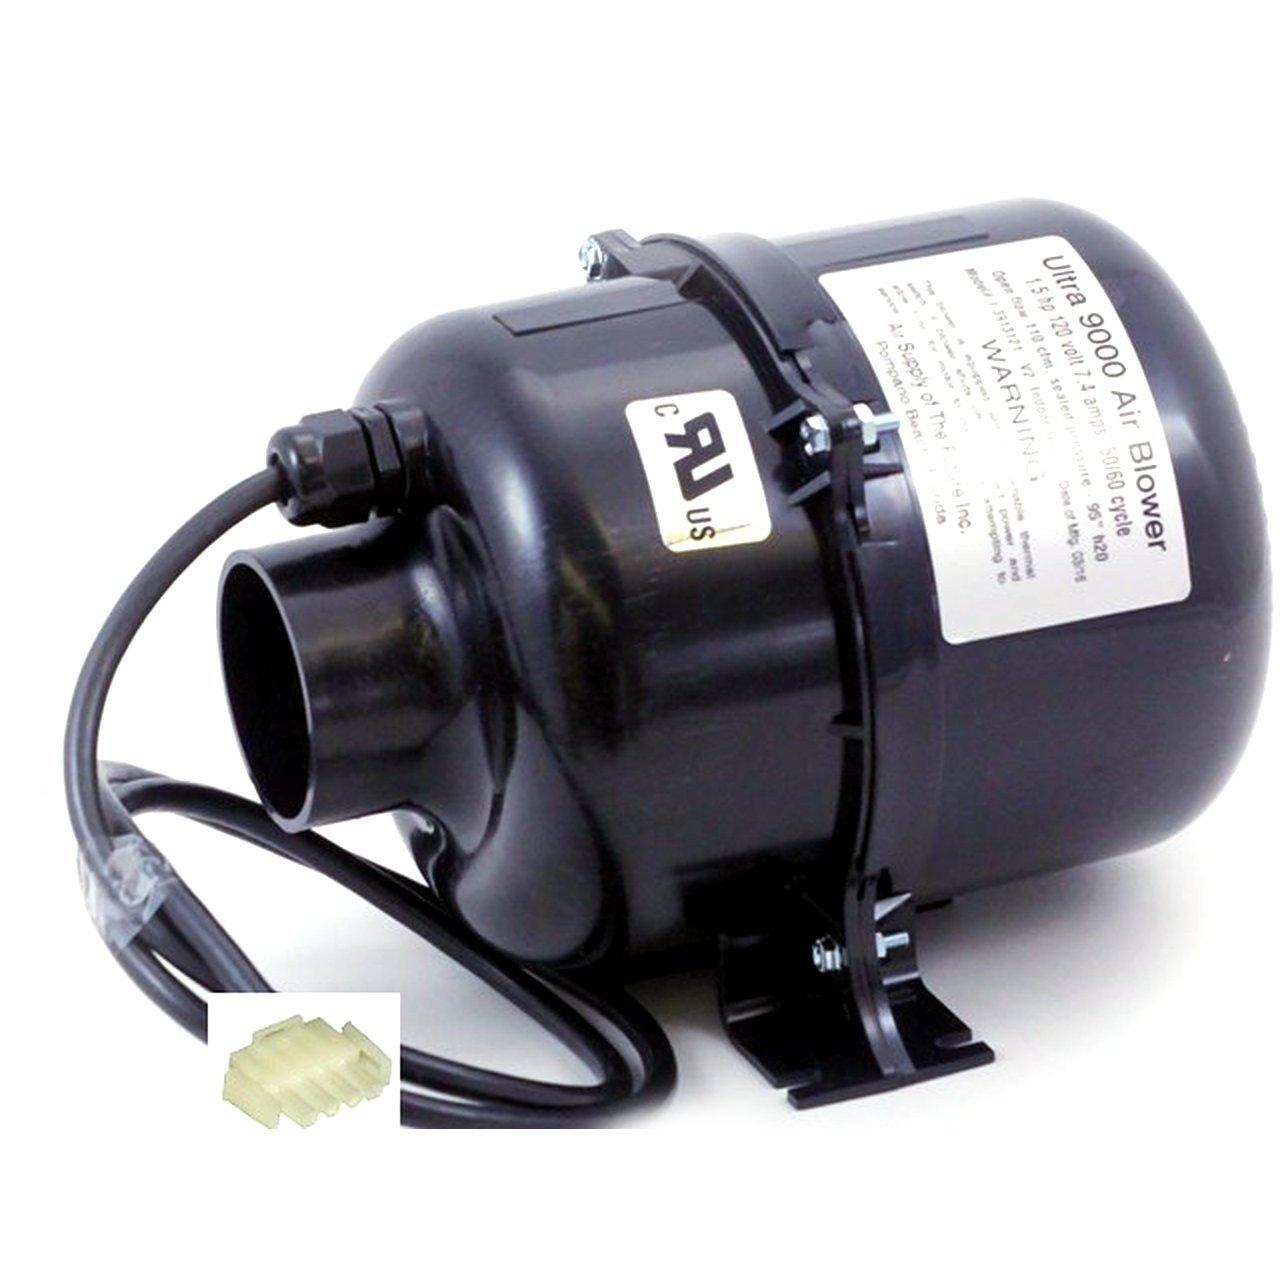 Air Blower Ultra 9000 1HP 120V with Amp Plug | In The Swim